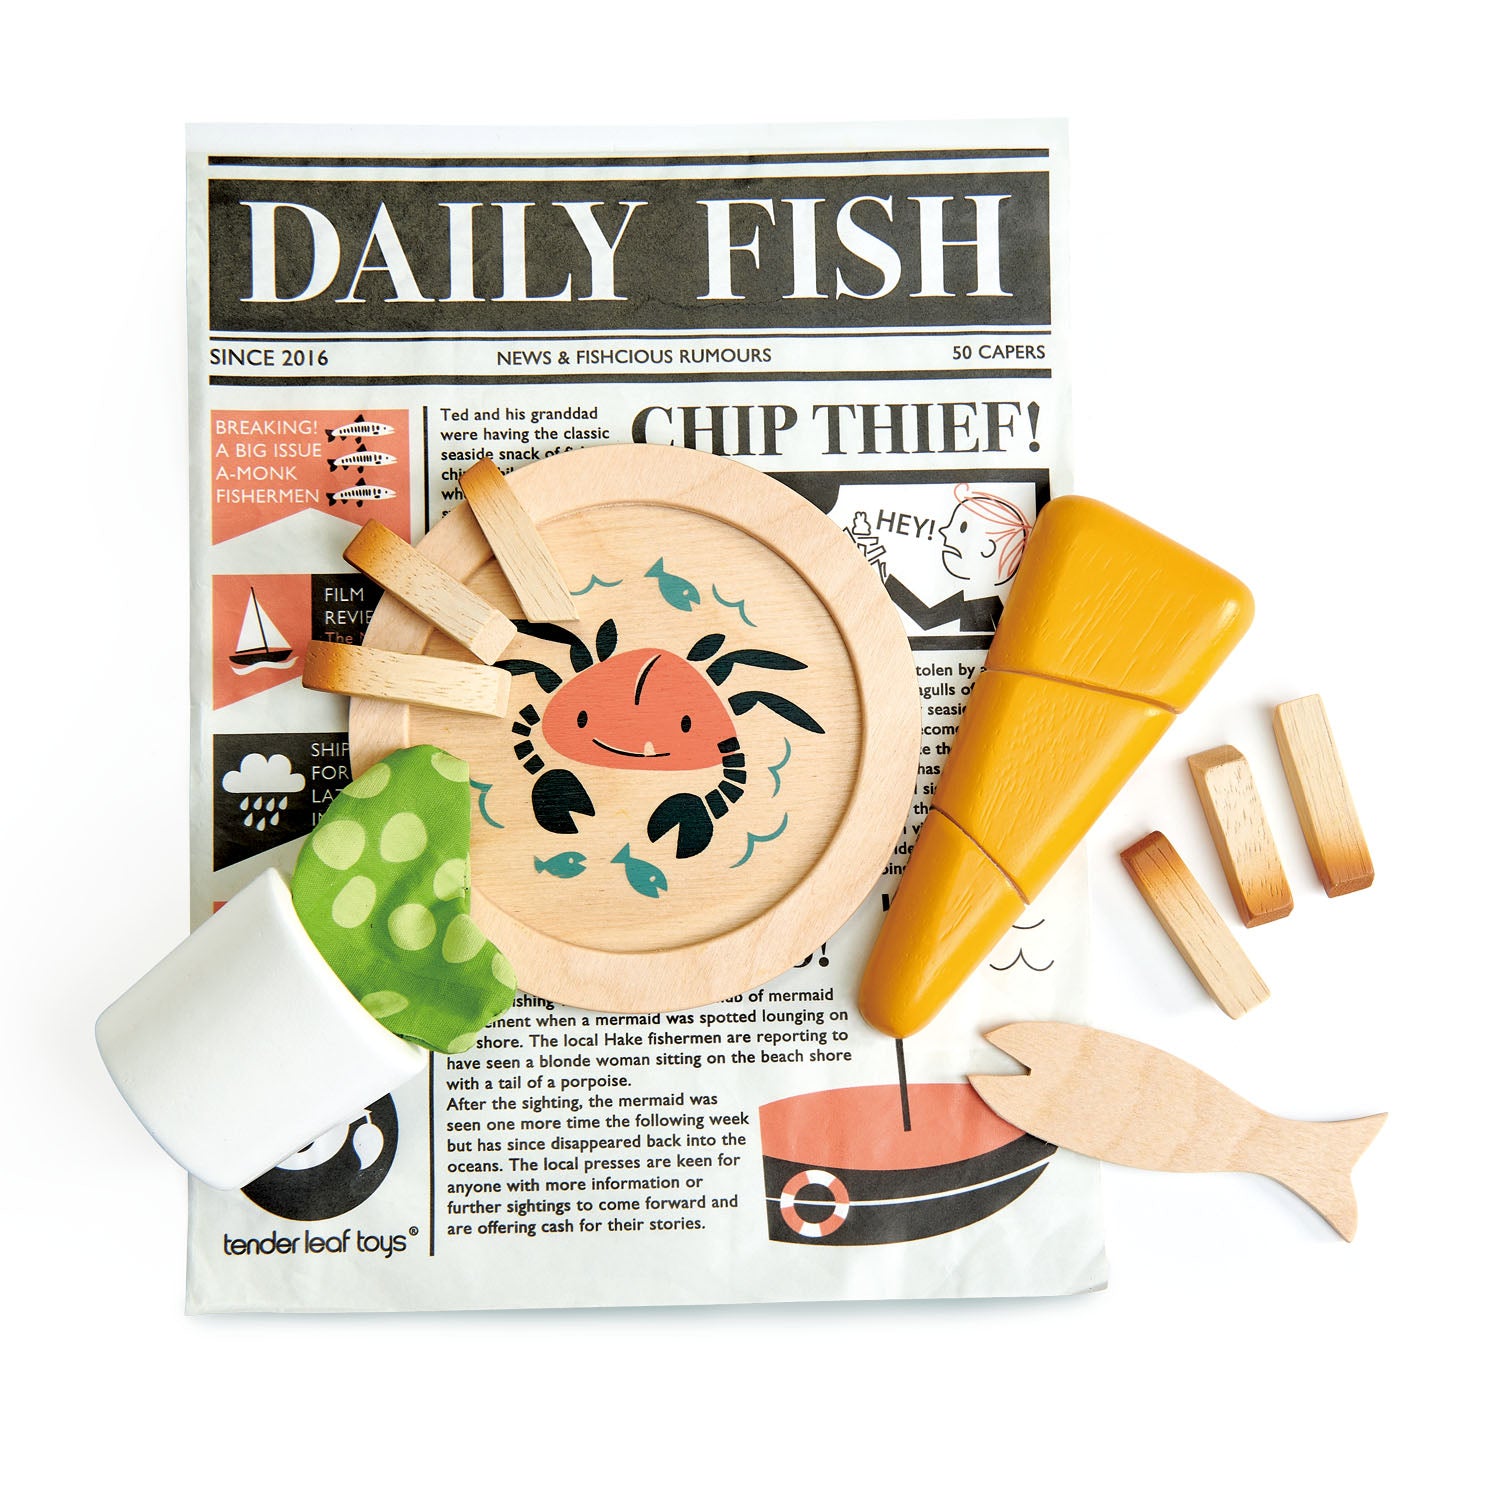 <p>A traditional seaside supper. Fish and chips, and mushy peas! A plate illustrated with a crab, a fork, tactile mushy peas in a cup, all wrapped up in the Daily Fish newspaper!</p>
<p>Age range: 3 Years And Older  </p>
<p>Product size: 7.87 x 10.24 x 2.95”  </p>
<p> Weight: 0.4 lbs</p>
<p><a href="https://www.dropbox.com/s/metb03l0kn3k2fv/TL8238%20Fish%20and%20Chips%20Printable.pdf?dl=0" title="Fish and Chips Printable"><img src="https://cdn.shopify.com/s/files/1/1083/1780/files/TL8238-Fish-and-Chips-Printable-dl_480x480.jpg?v=1597916530" alt="Fish and Chips Printable"></a></p>
